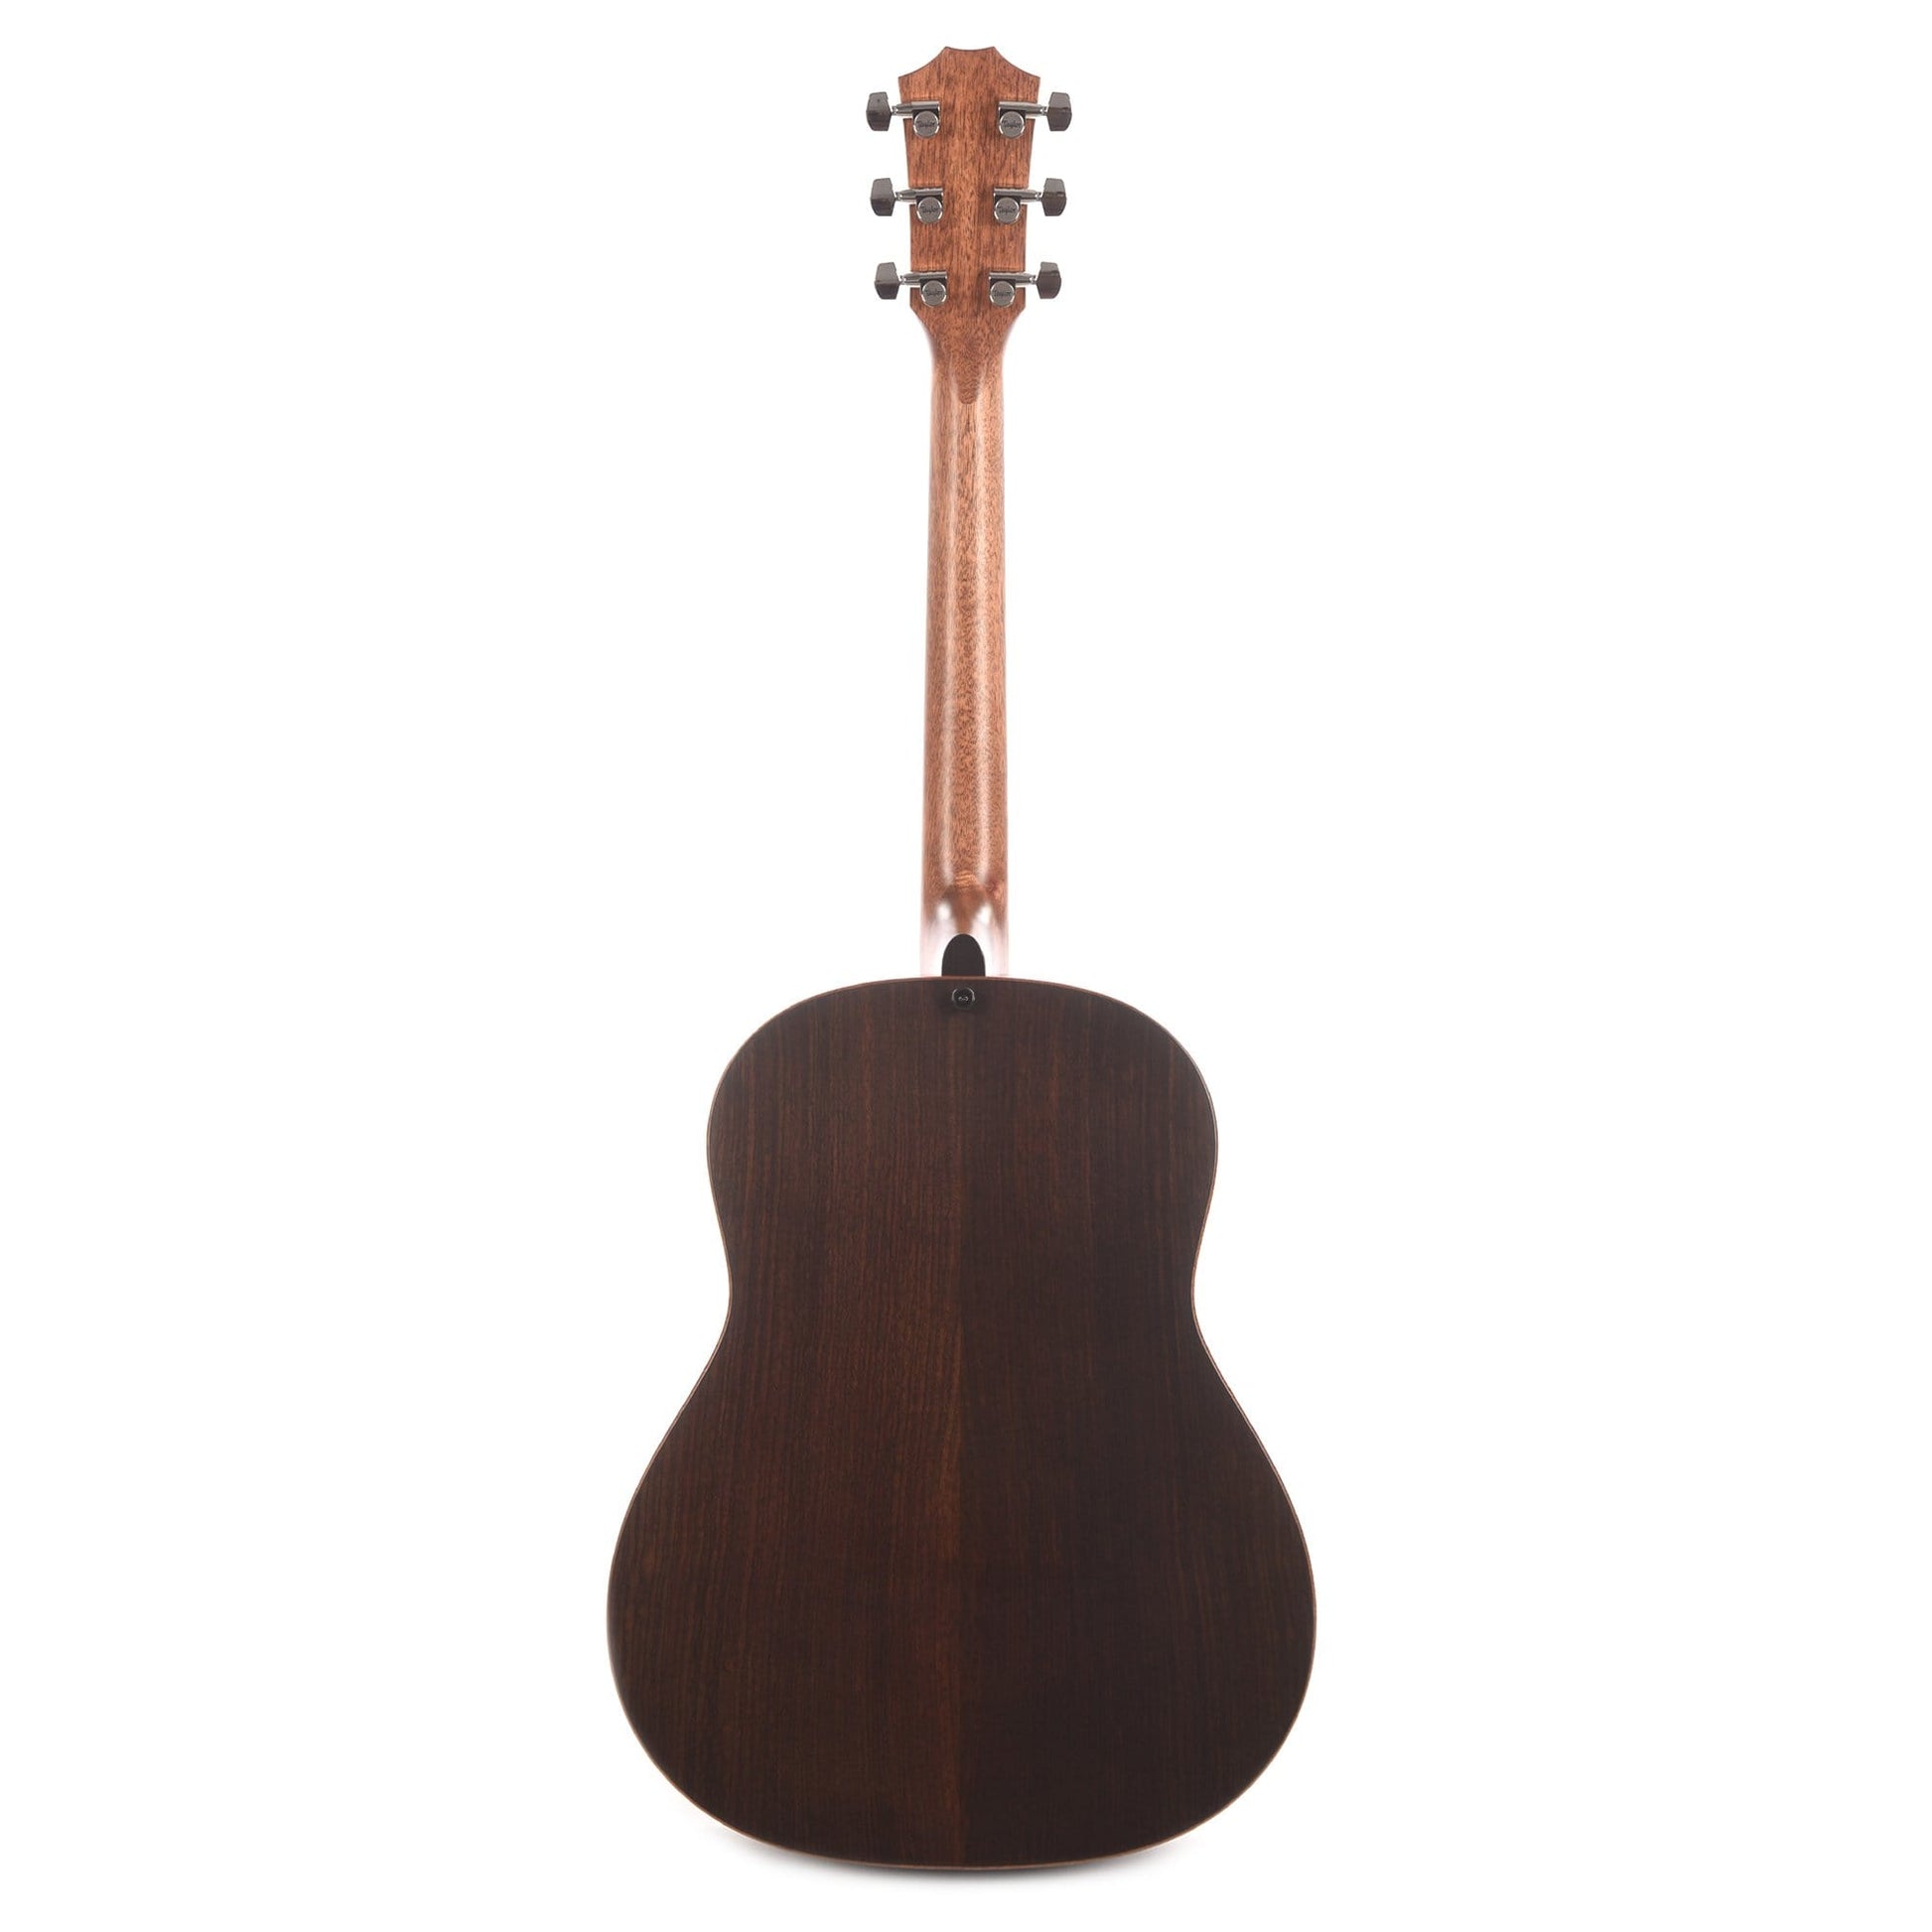 Taylor 717 Builder's Edition Grand Pacific Torrefied Sitka/Rosewood Wild Honey Burst Acoustic Guitars / Dreadnought